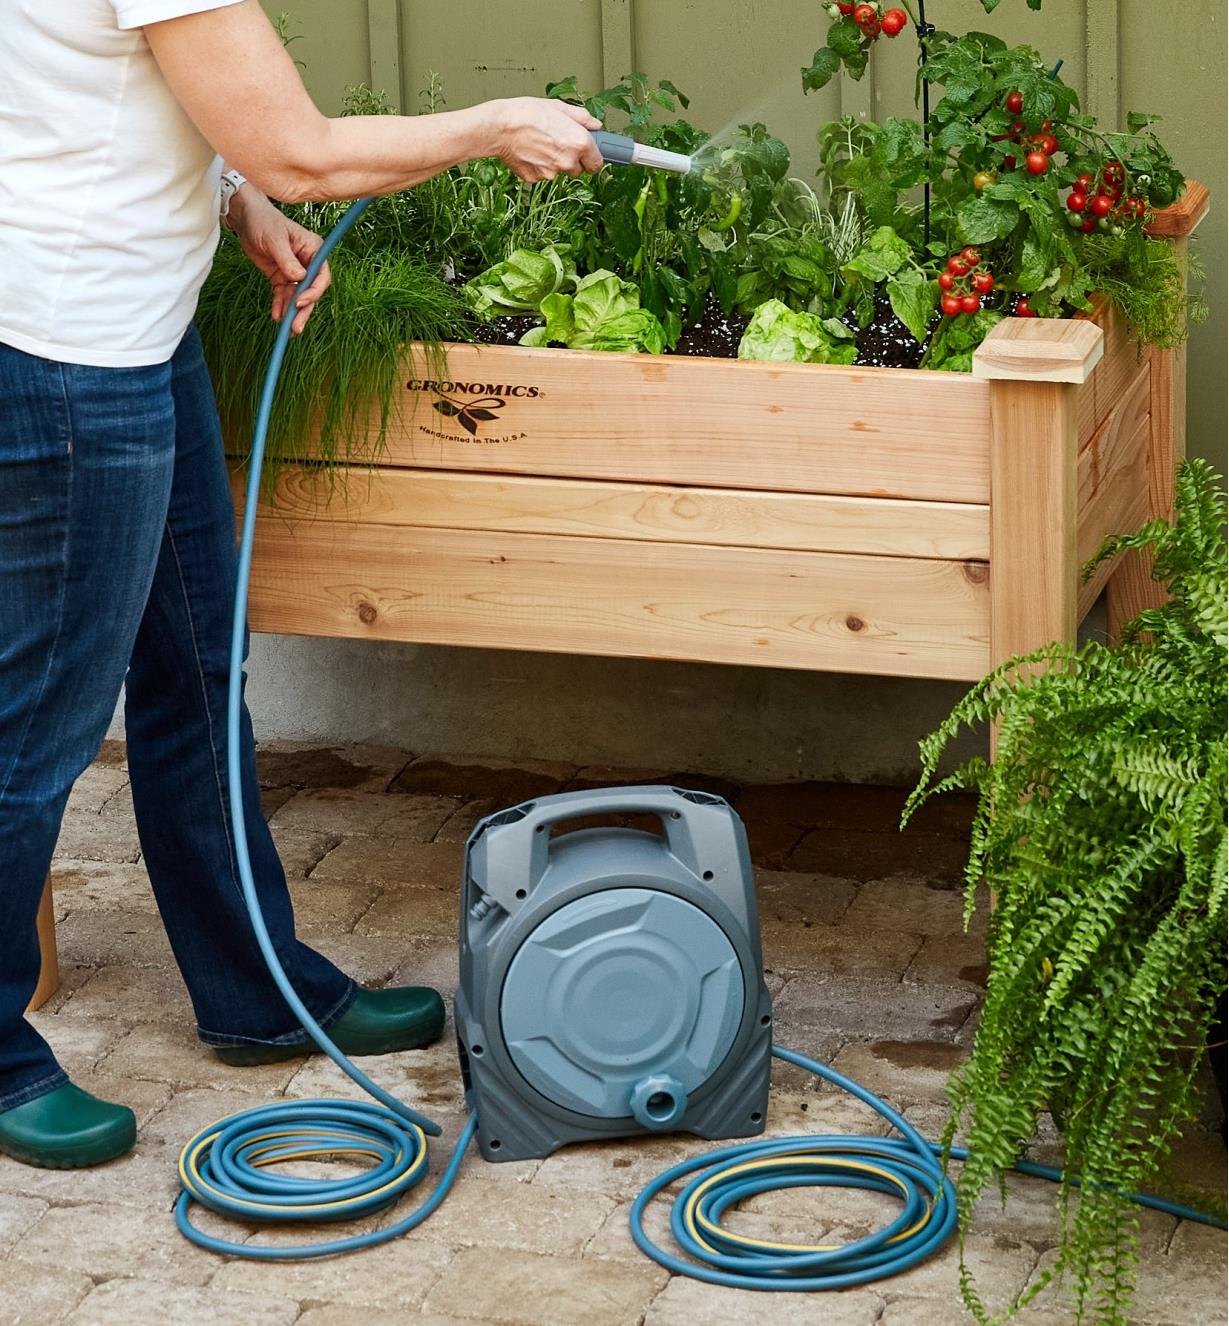 A gardener uses the hose from the manual reel to water vegetables in a raised planter